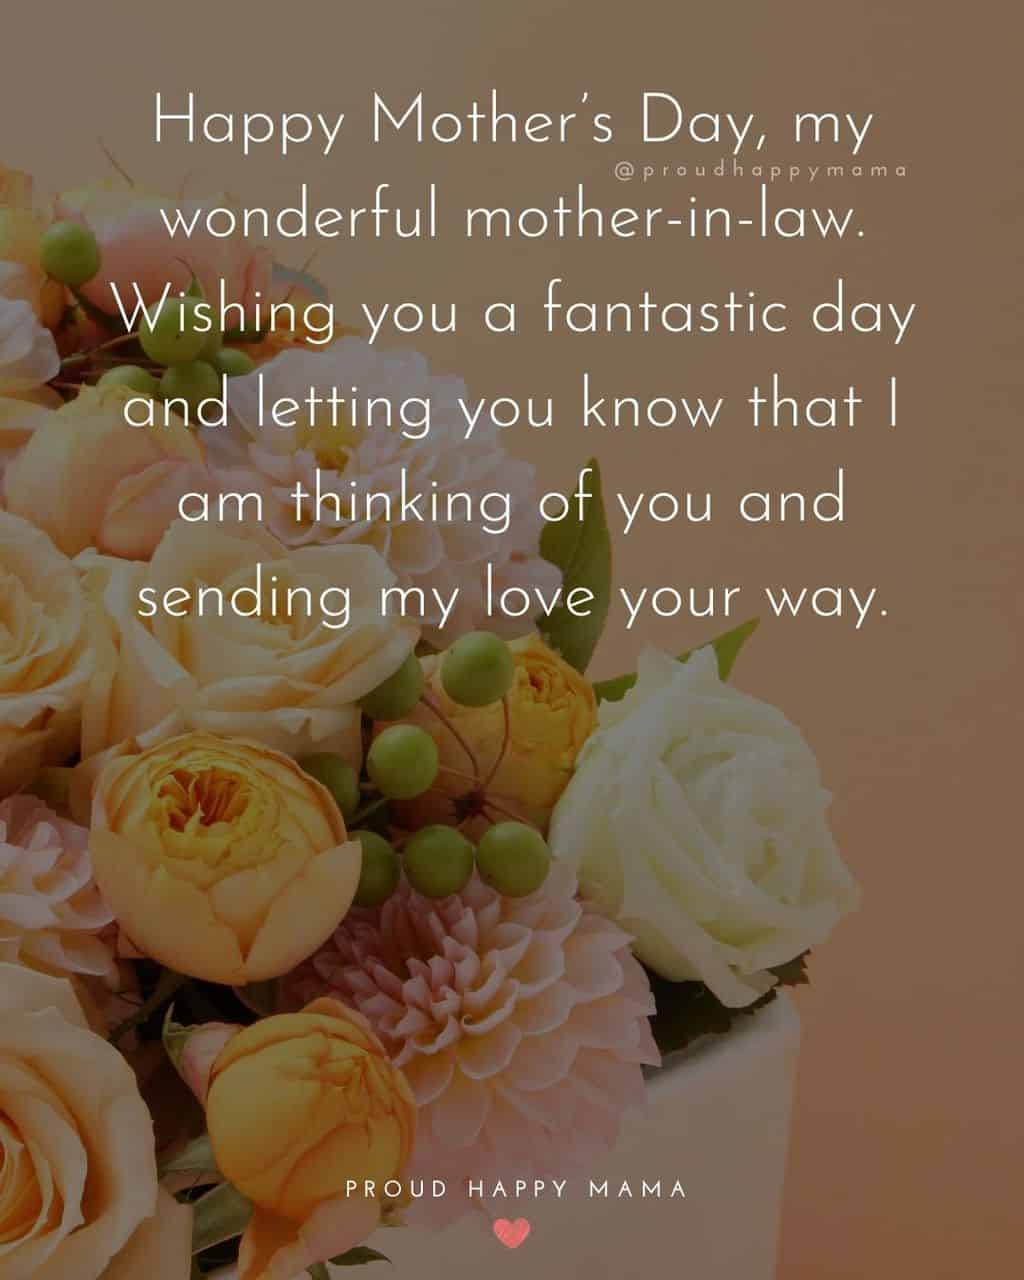 Happy Mothers Day Quotes For Mother In Law - Happy Mother’s Day, my wonderful mother in law. Wishing you a fantastic day and letting